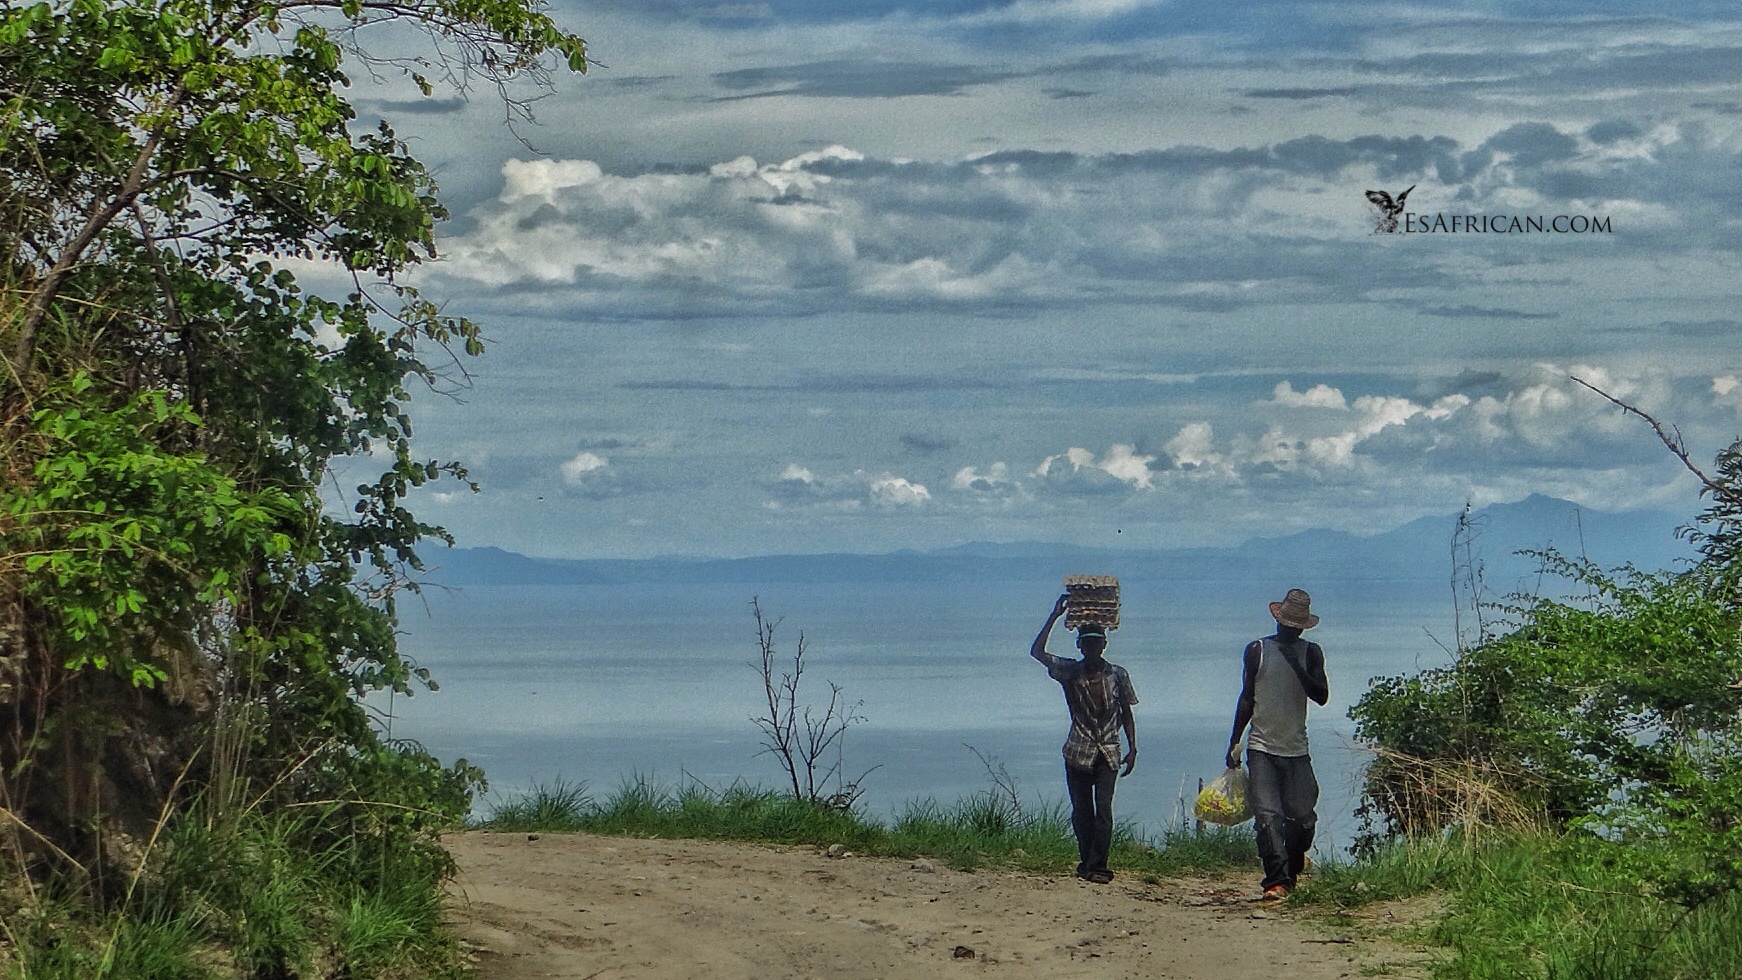 Lake Malawi view from the notorious Livingstonia Road. Some people prefer to hike this route but I did not find any great problem with the road. I have a list of very interesting roads I have driven in Malawi. Many prefer to walk on those routes..